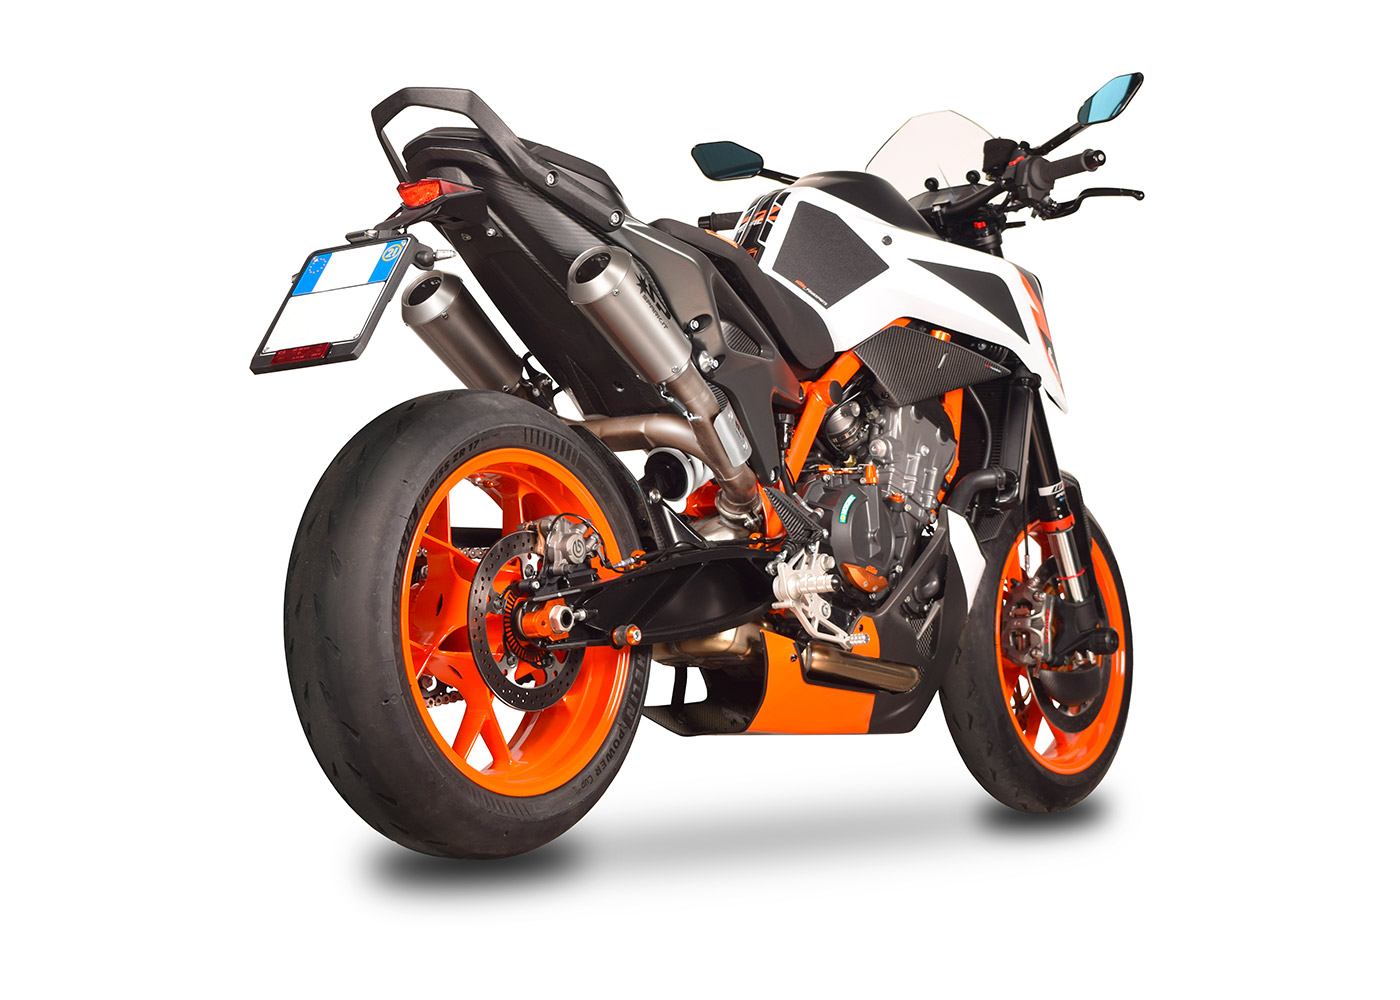 Homologated Moto GP double exhaust system for KTM Duke 790 Spark Exhaust